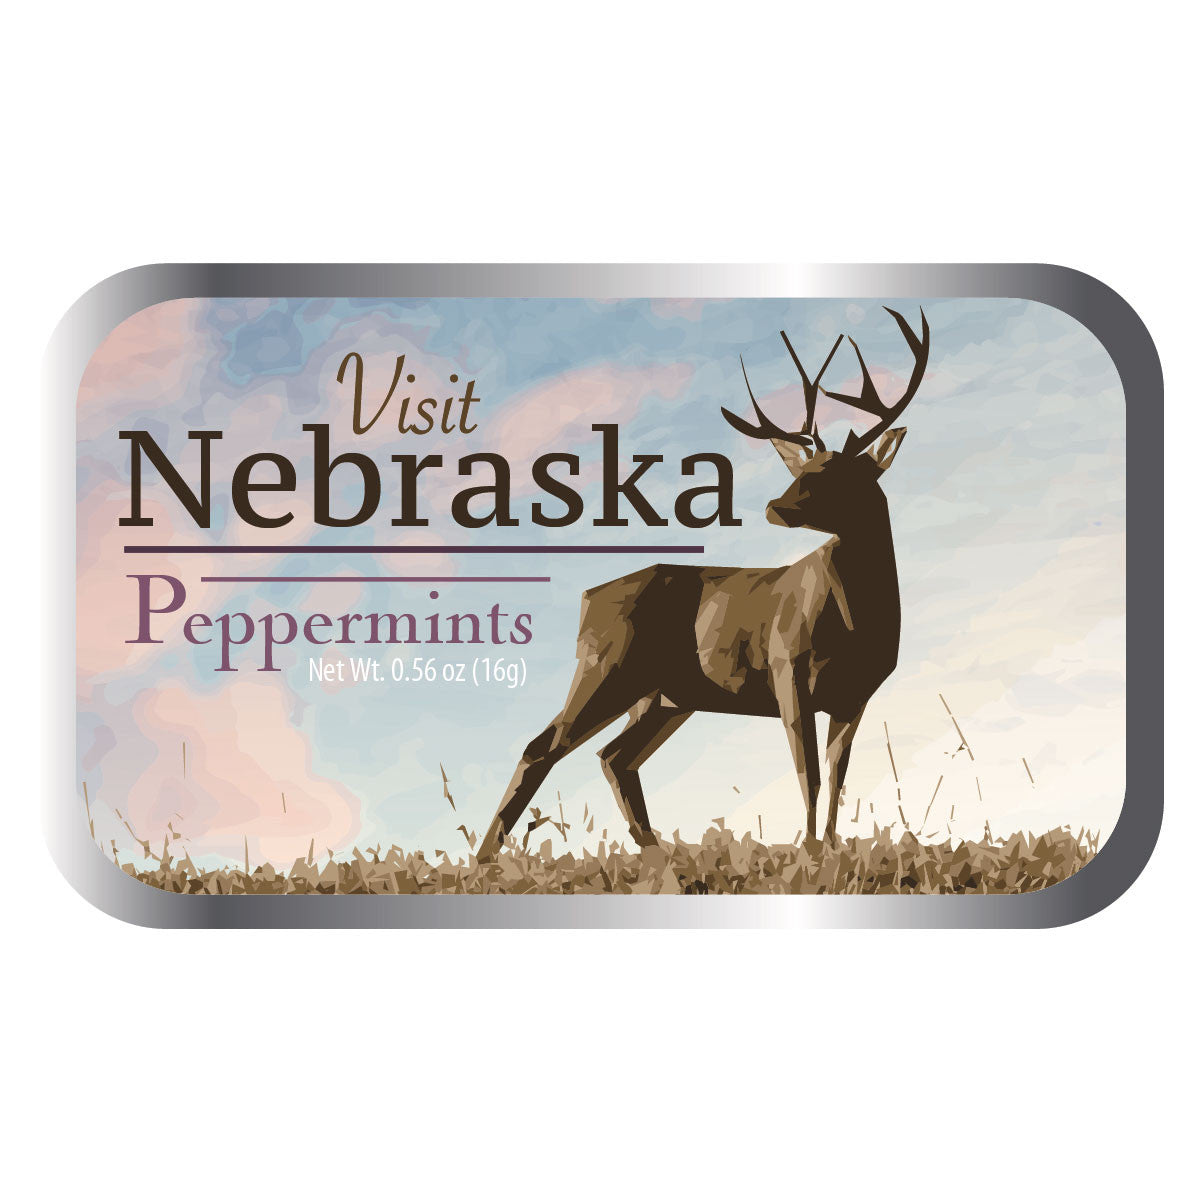 Deer Field Nebraska - 0257S  AmuseMints Sweets and Snacks - USA-Made  Mints, Chocolate, Specialty Confections, Custom Printed Tins, Boxes and  Bags.